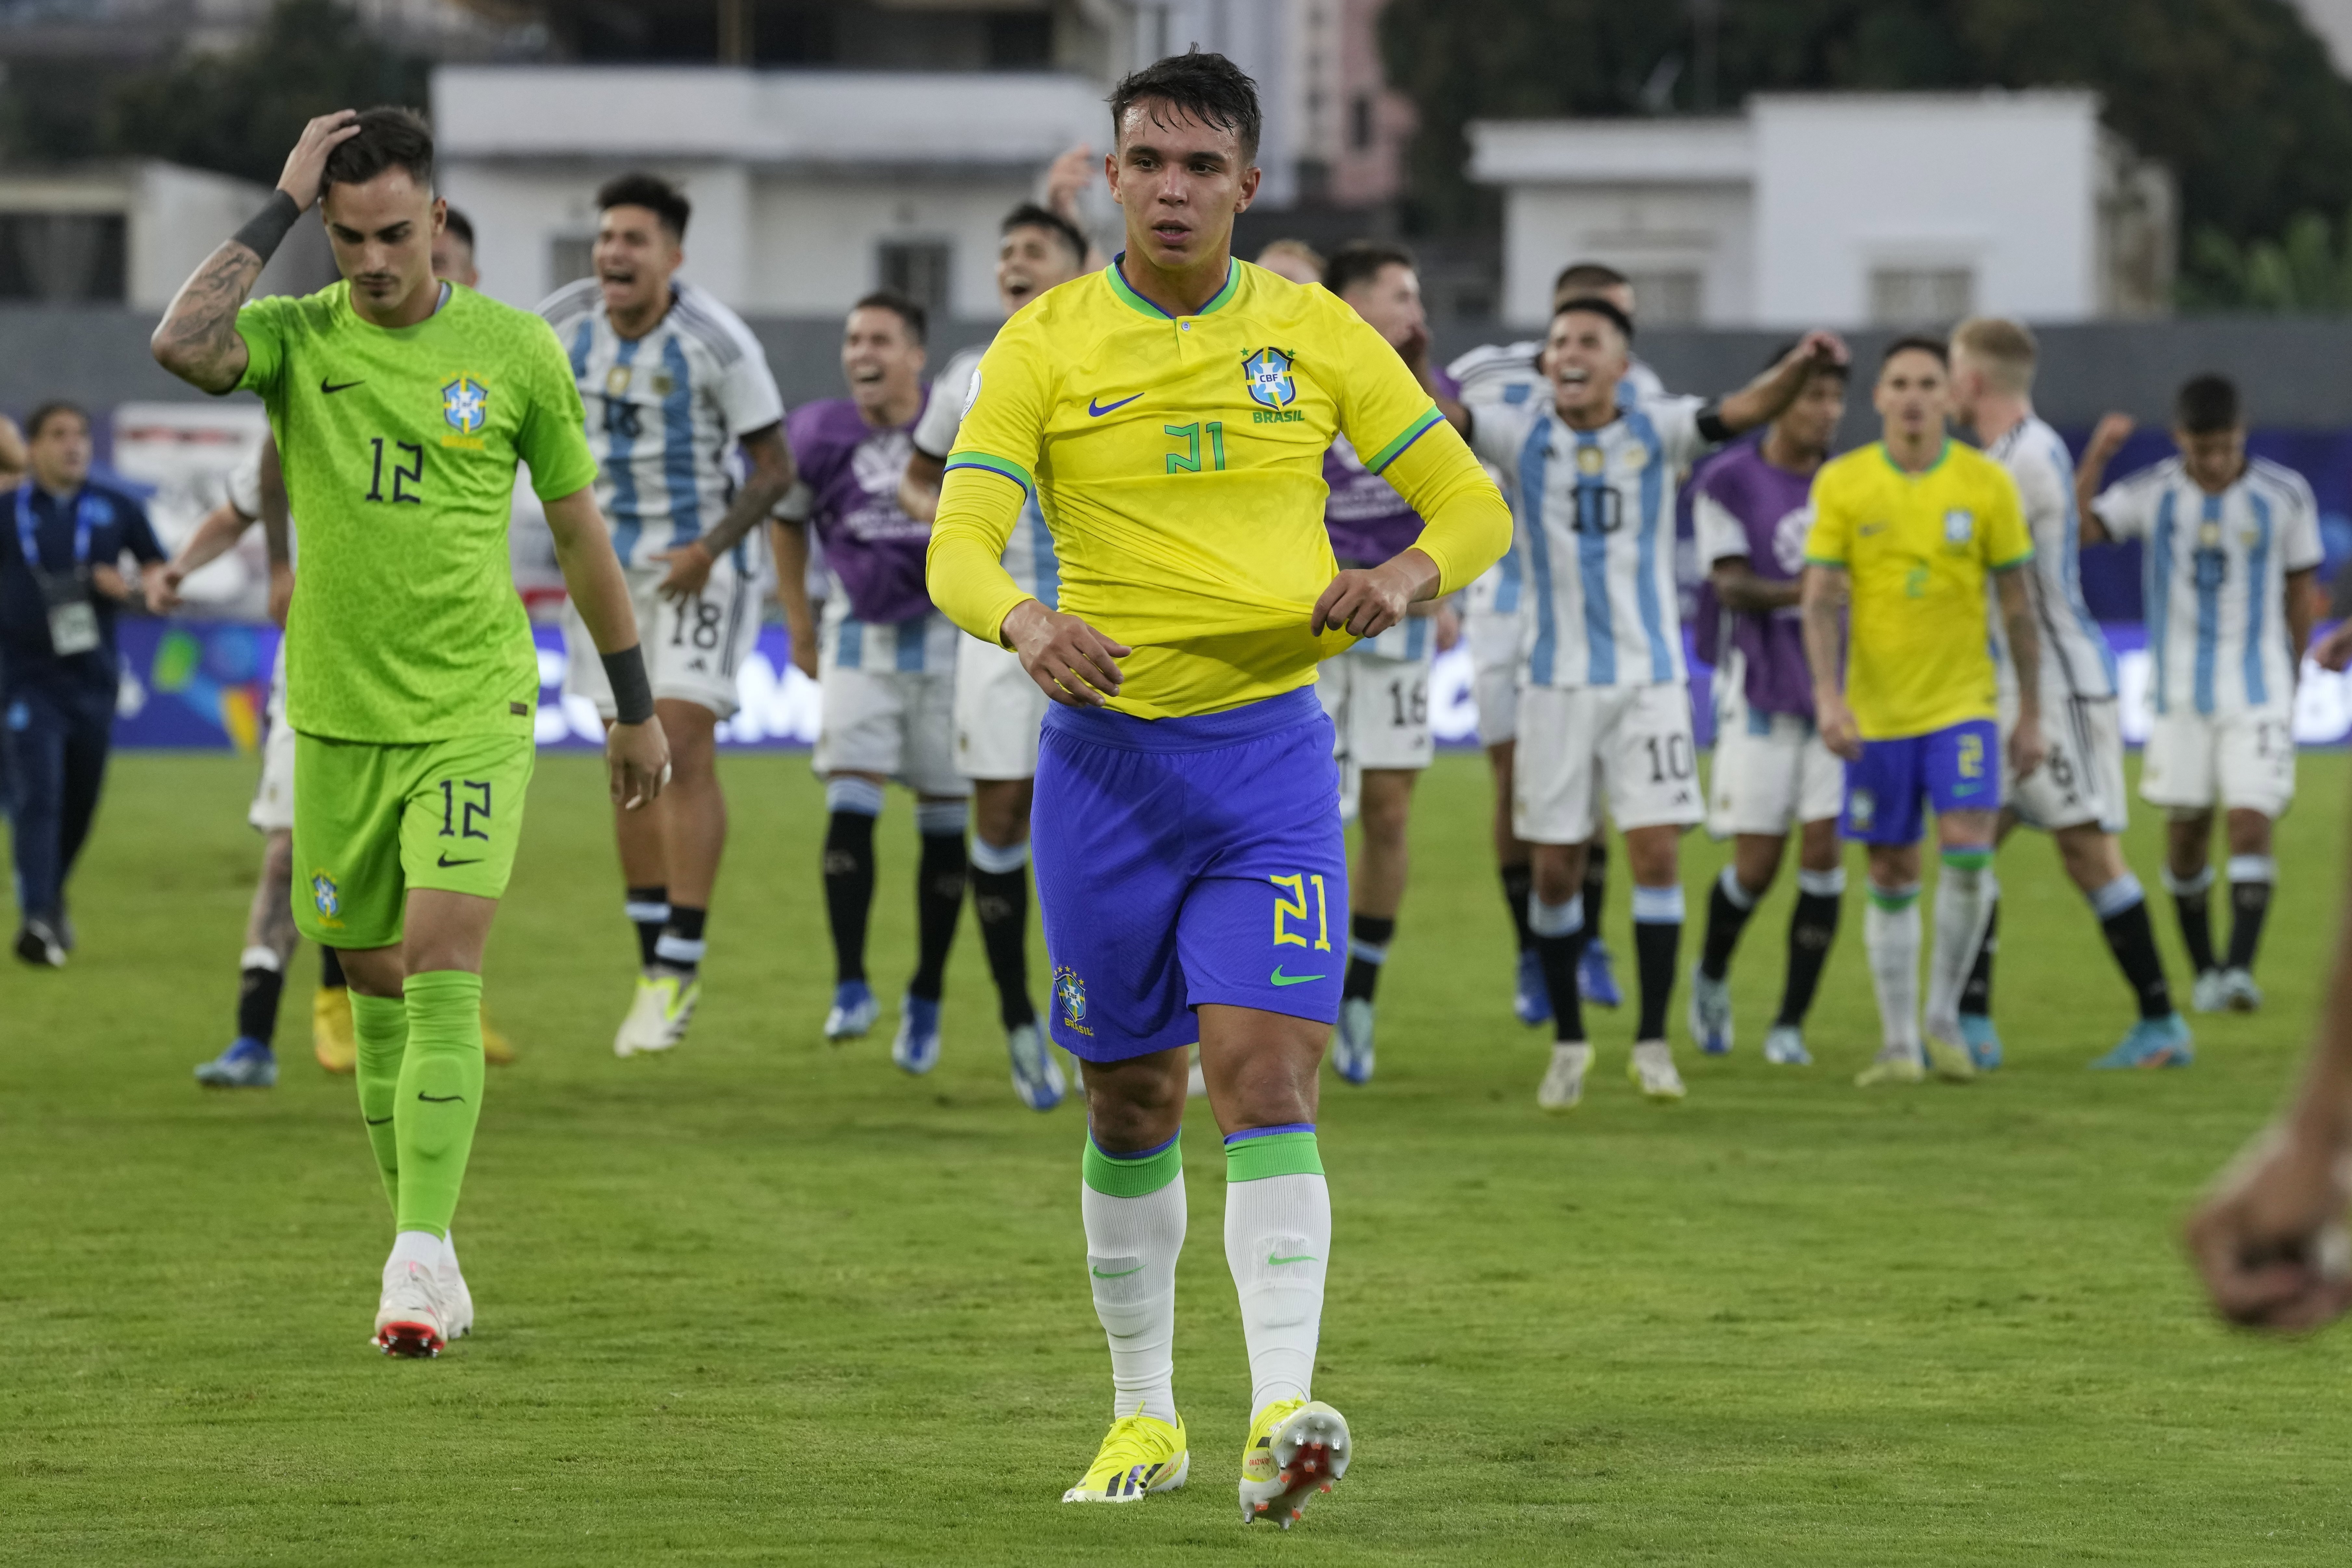 Brazil's Geovane and goalkeeper Matheus Donelli walk off the field after their 0-1 loss.